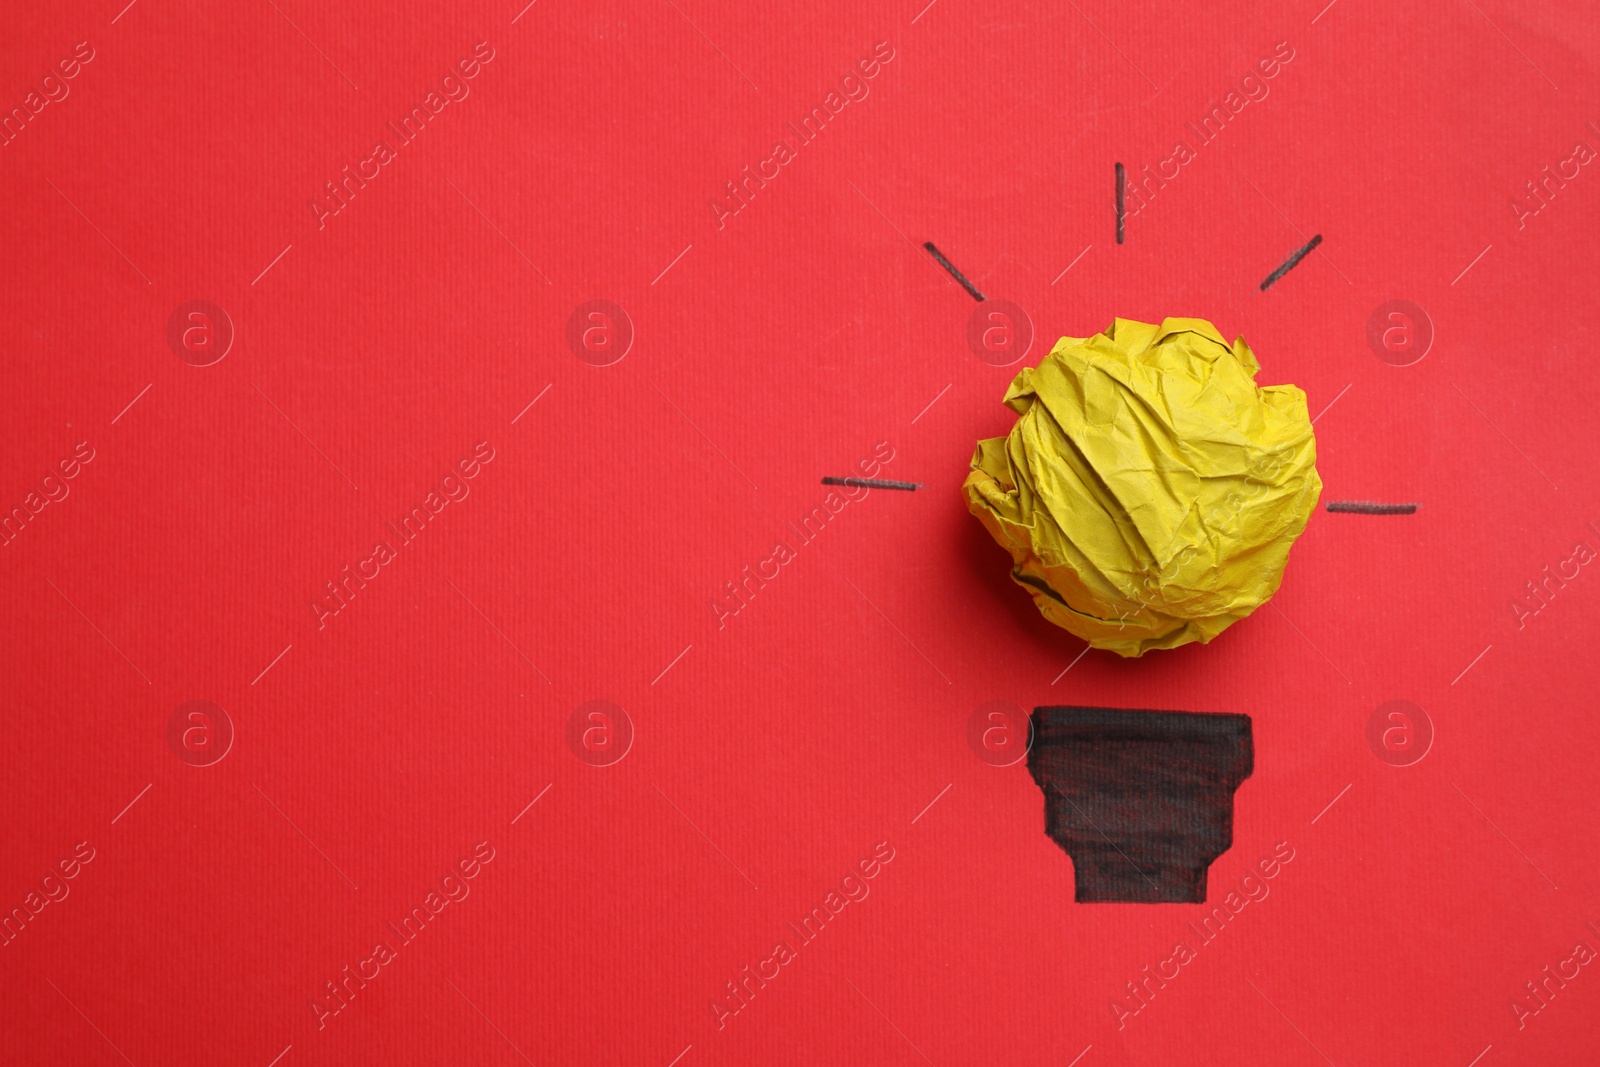 Photo of Idea concept. Light bulb made with crumpled paper and drawing on red background, top view. Space for text